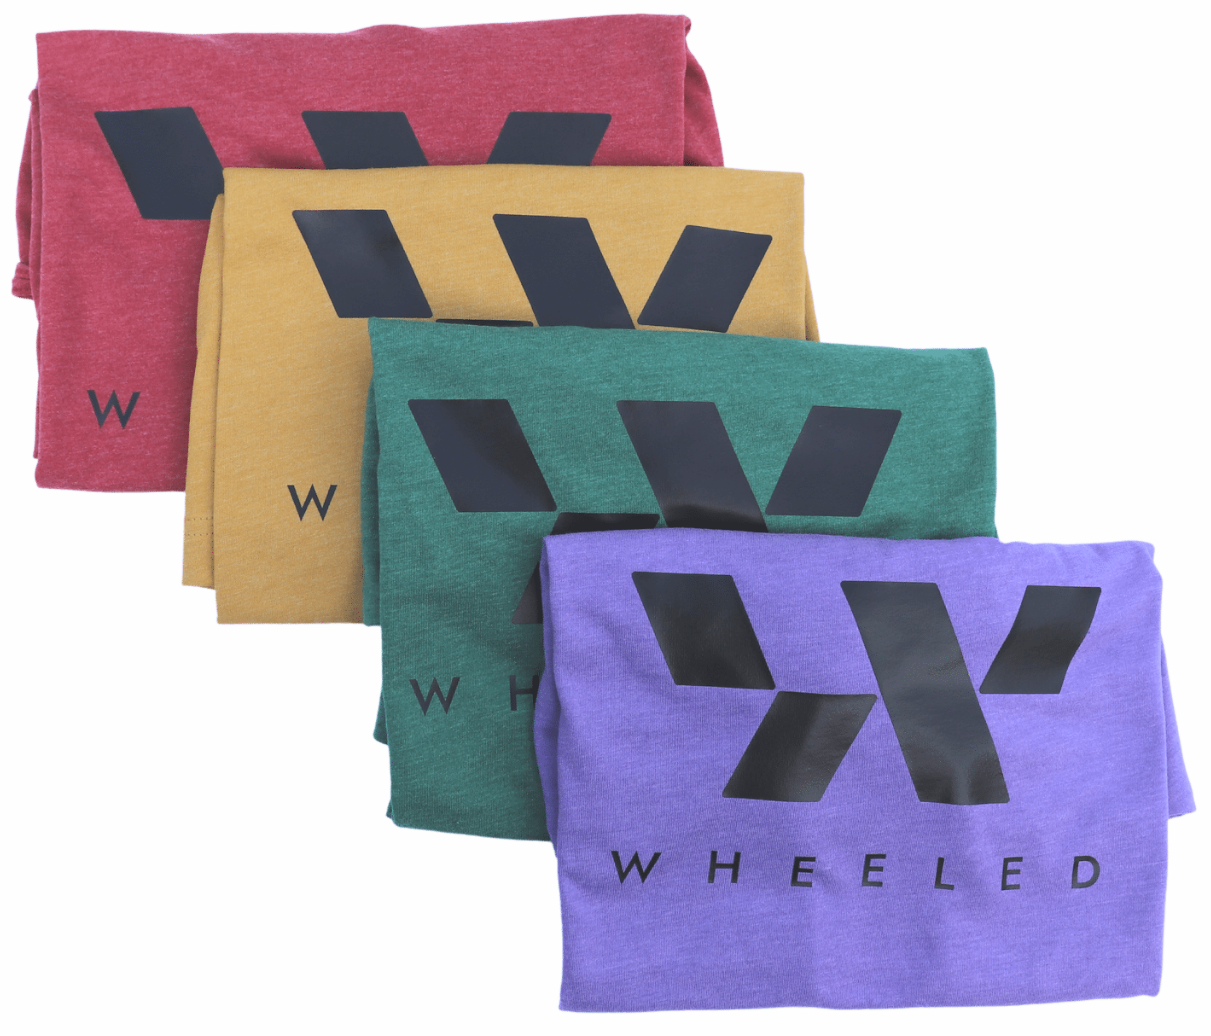 Original Wheeled Shirts in New Colors.